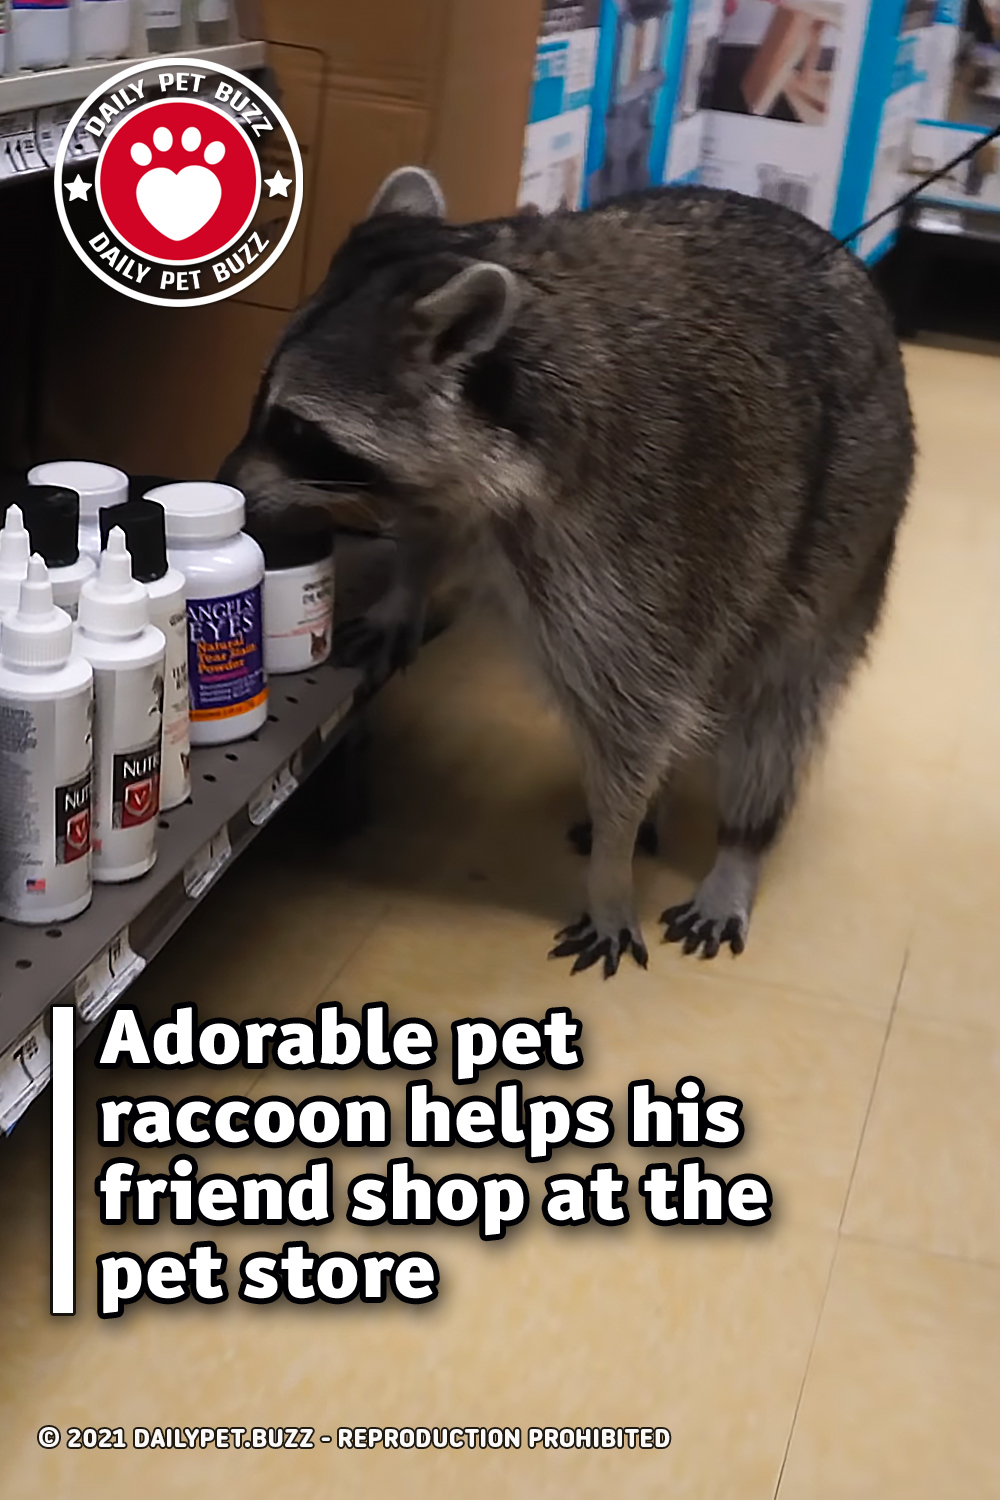 Adorable pet raccoon helps his friend shop at the pet store